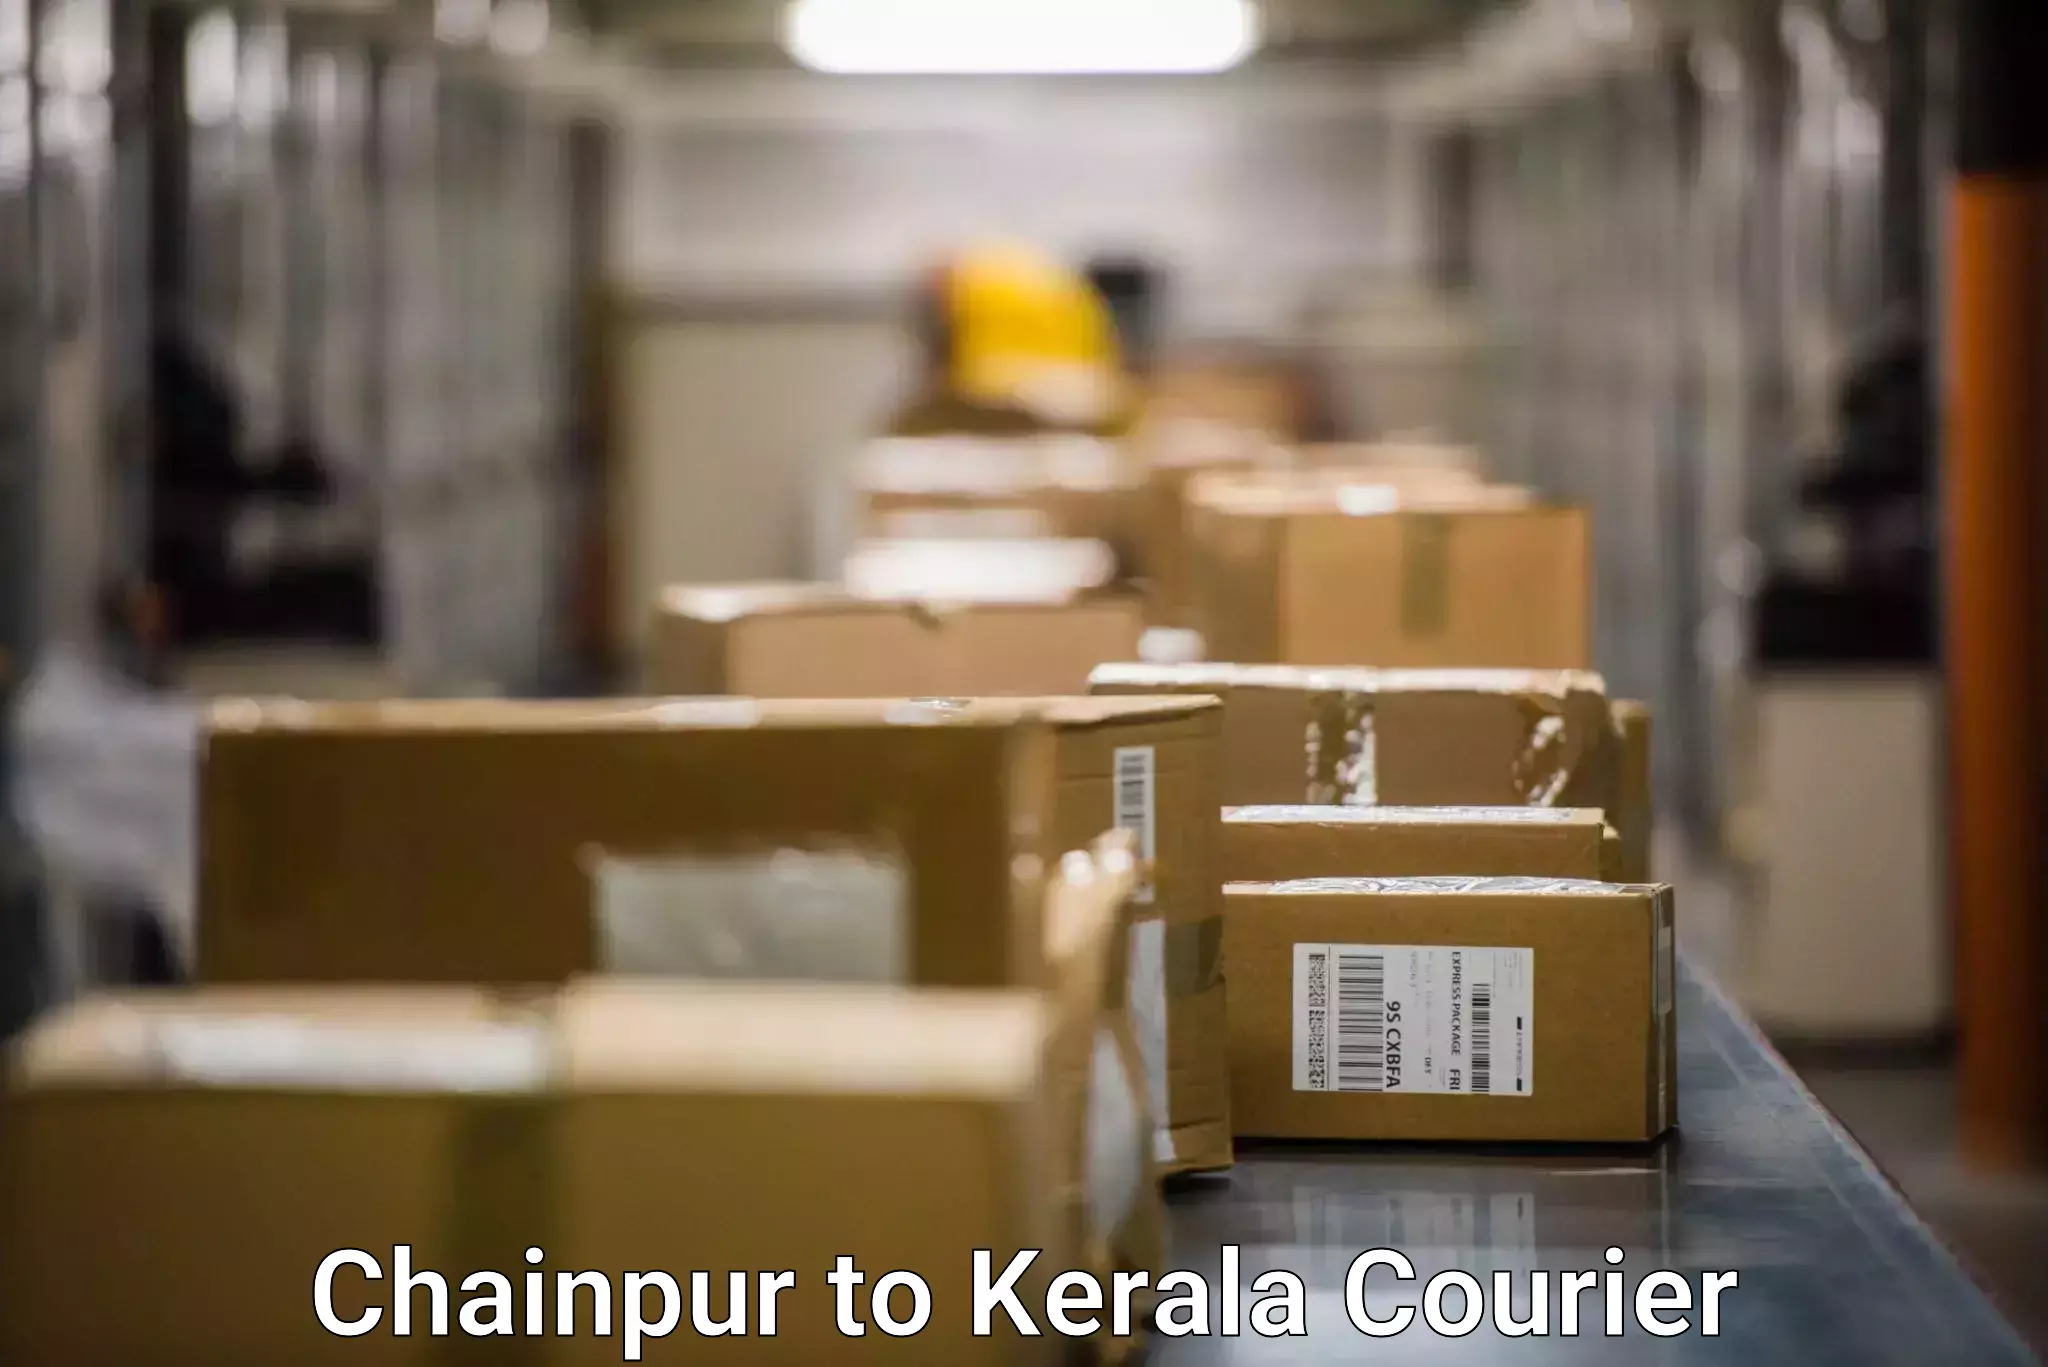 Global shipping networks Chainpur to Punalur